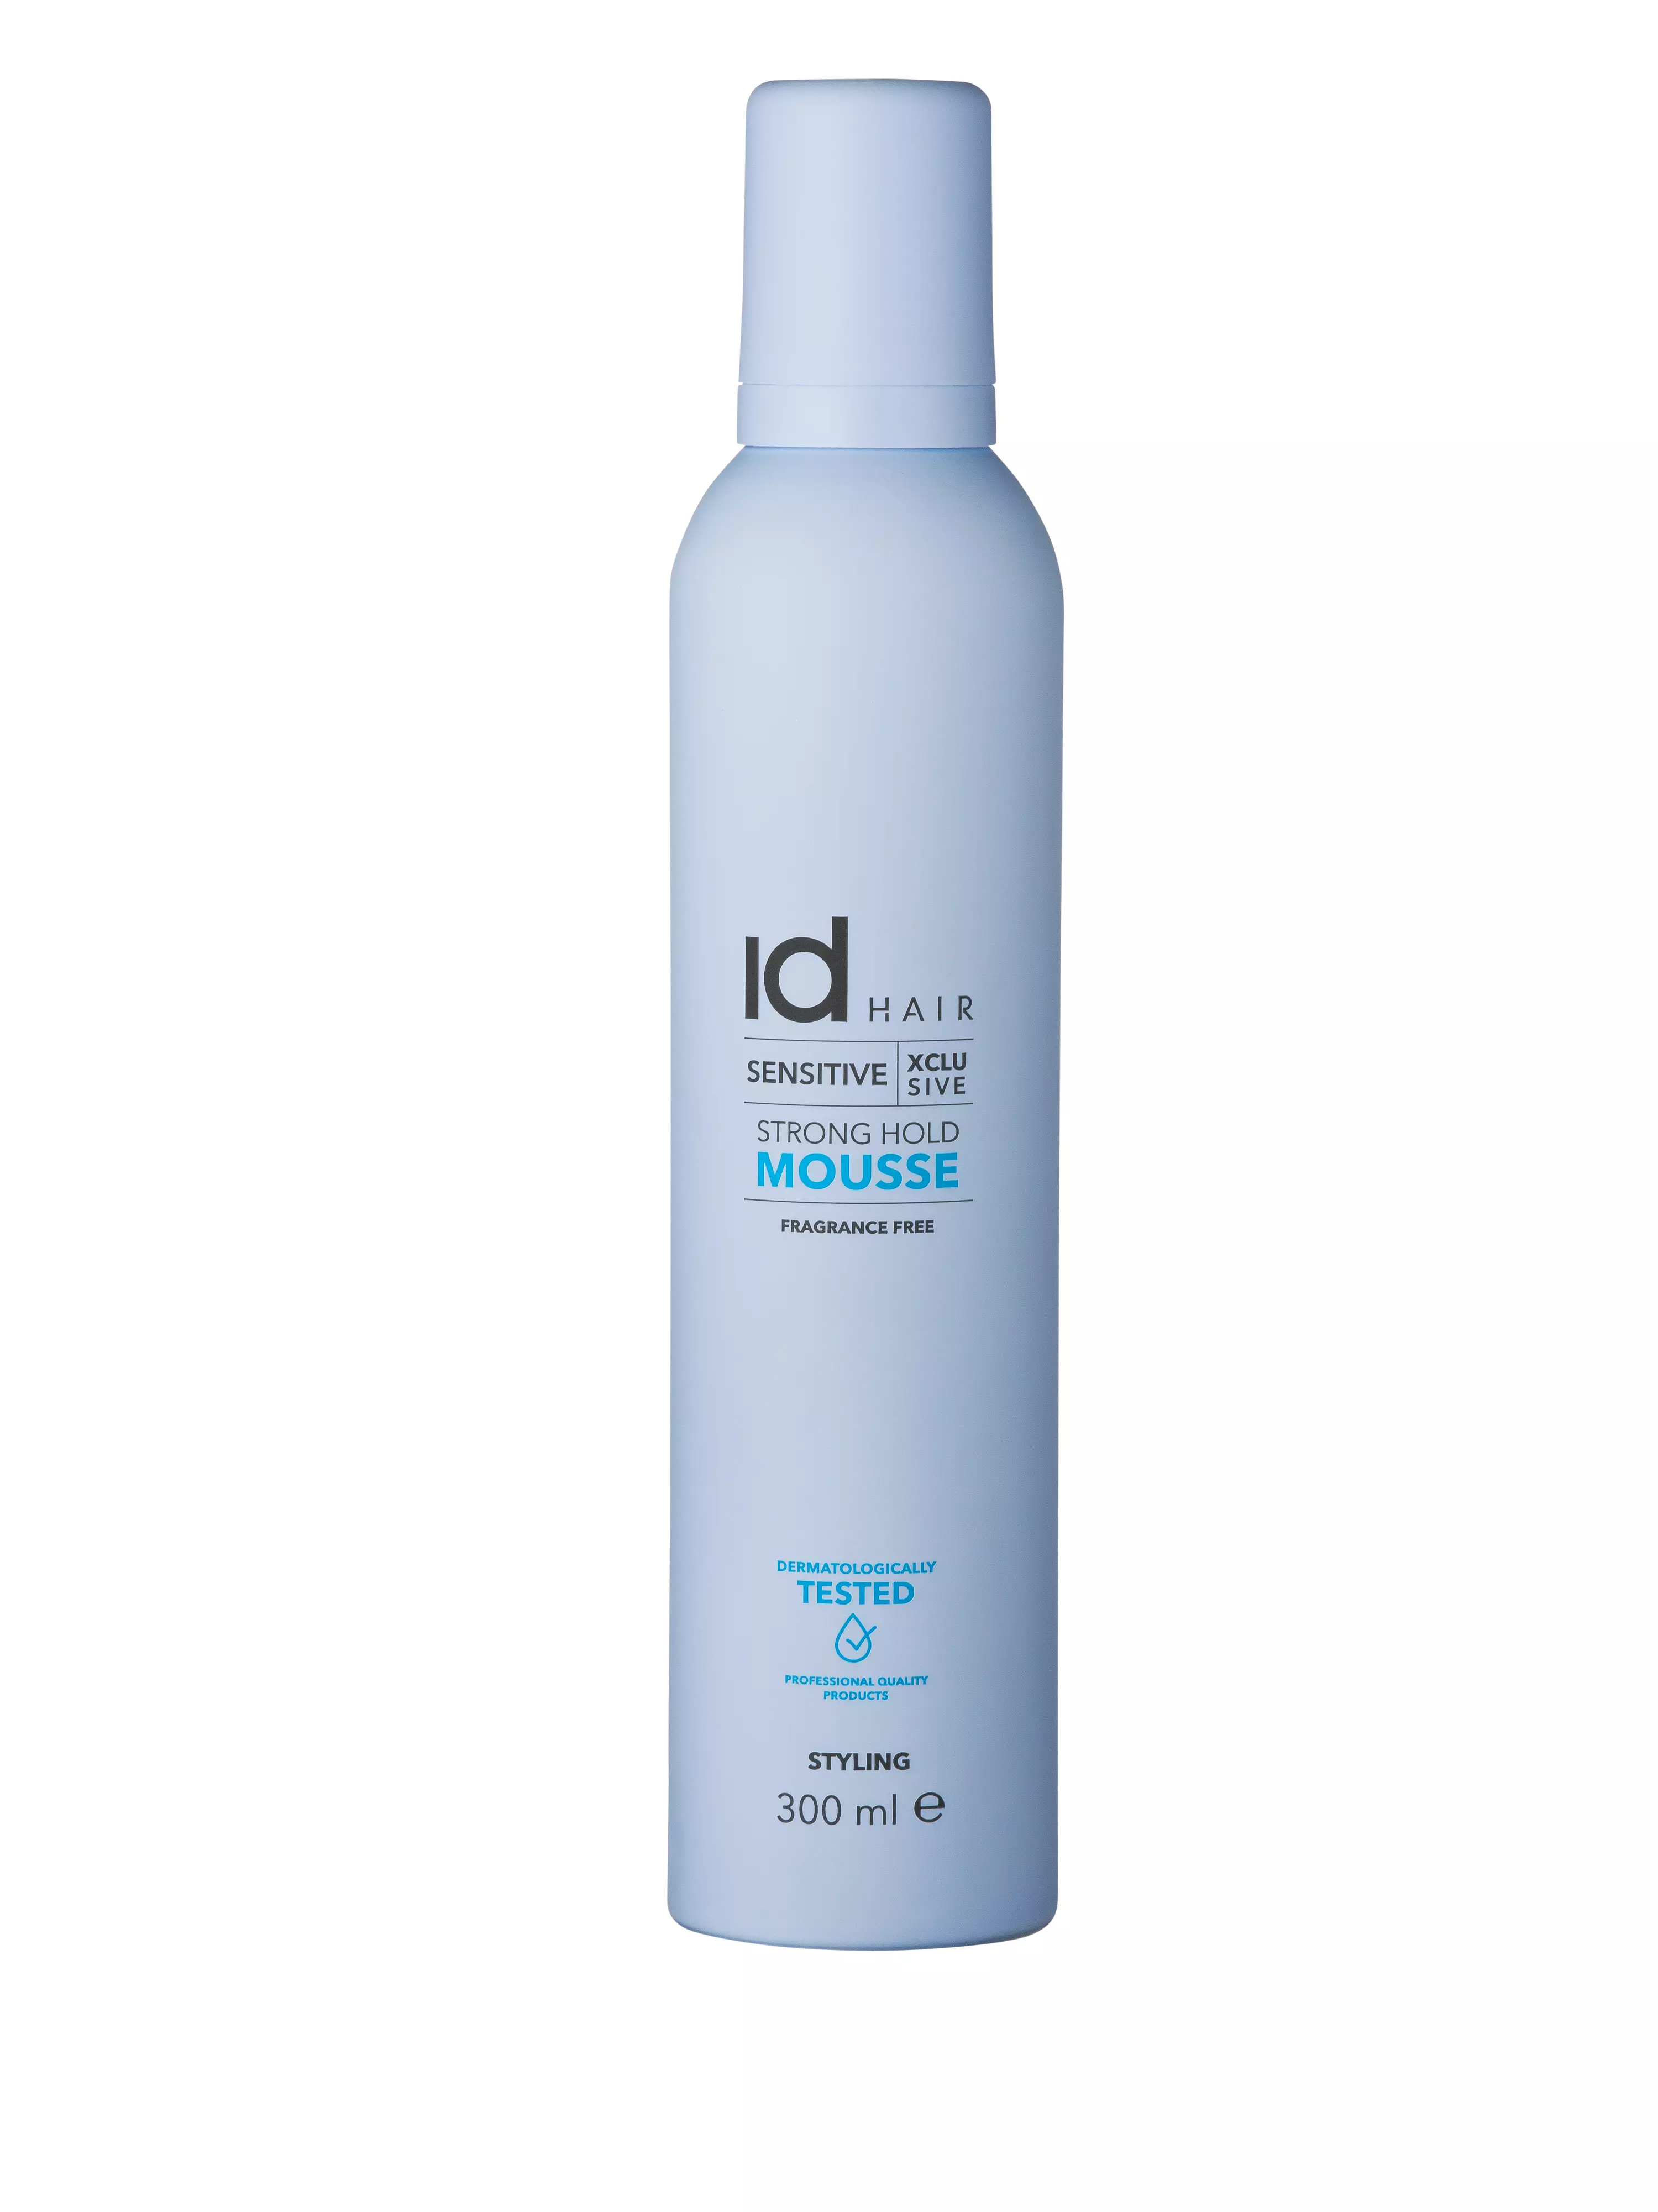 Idhair Sensitive Xclusive Strong Hold Mousse